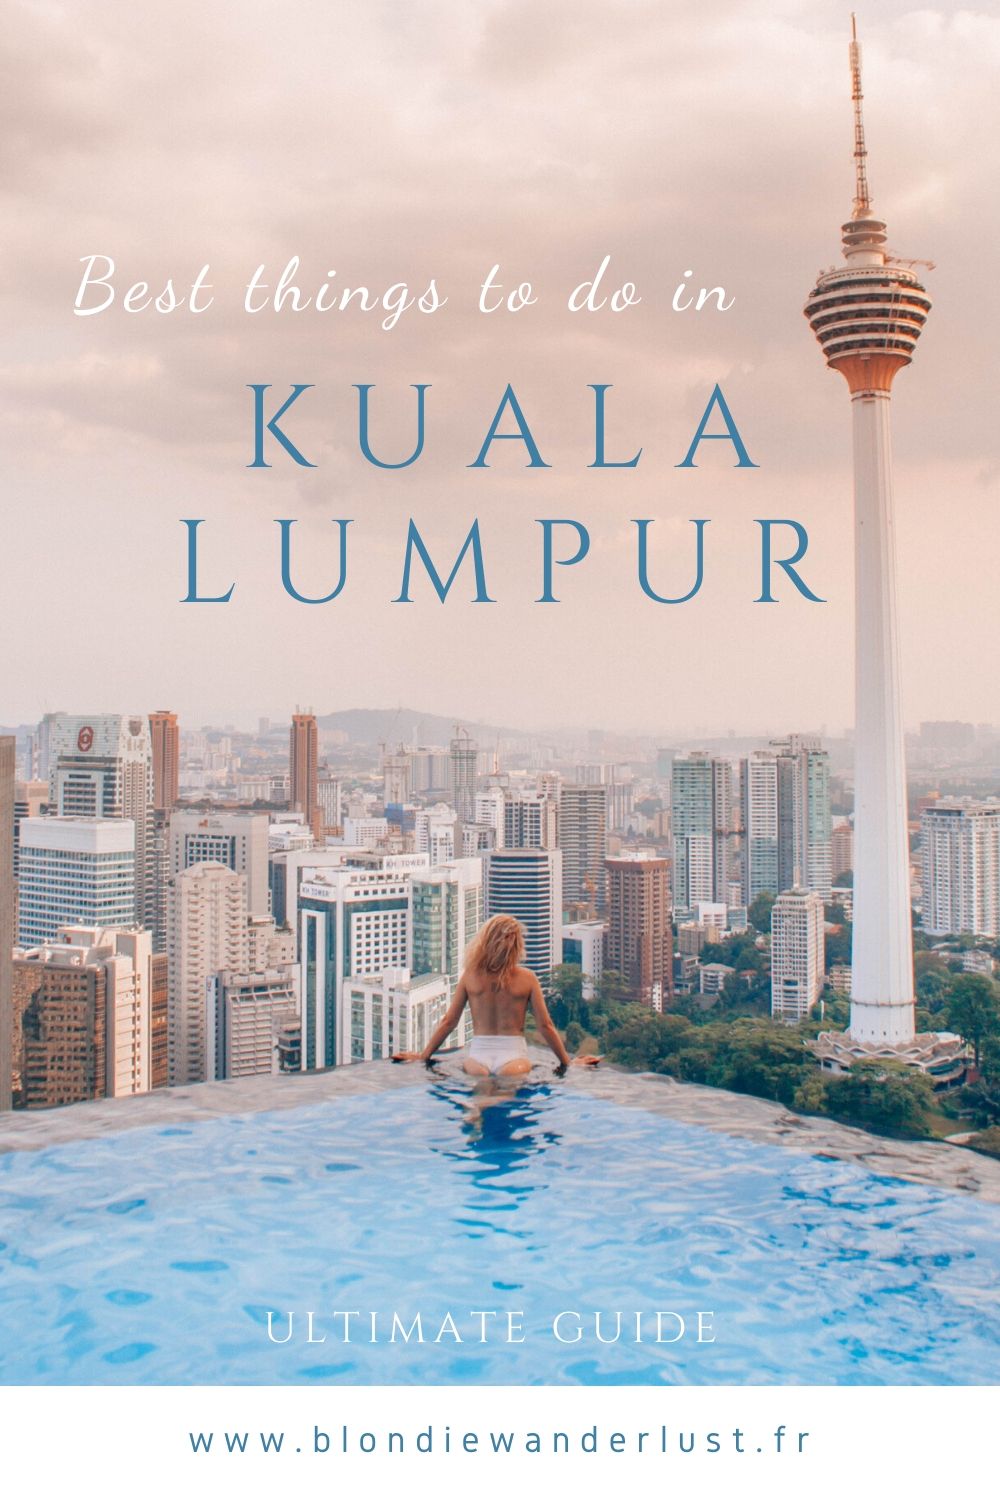 Best things to do in Kuala Lumpur, the ultimate guide